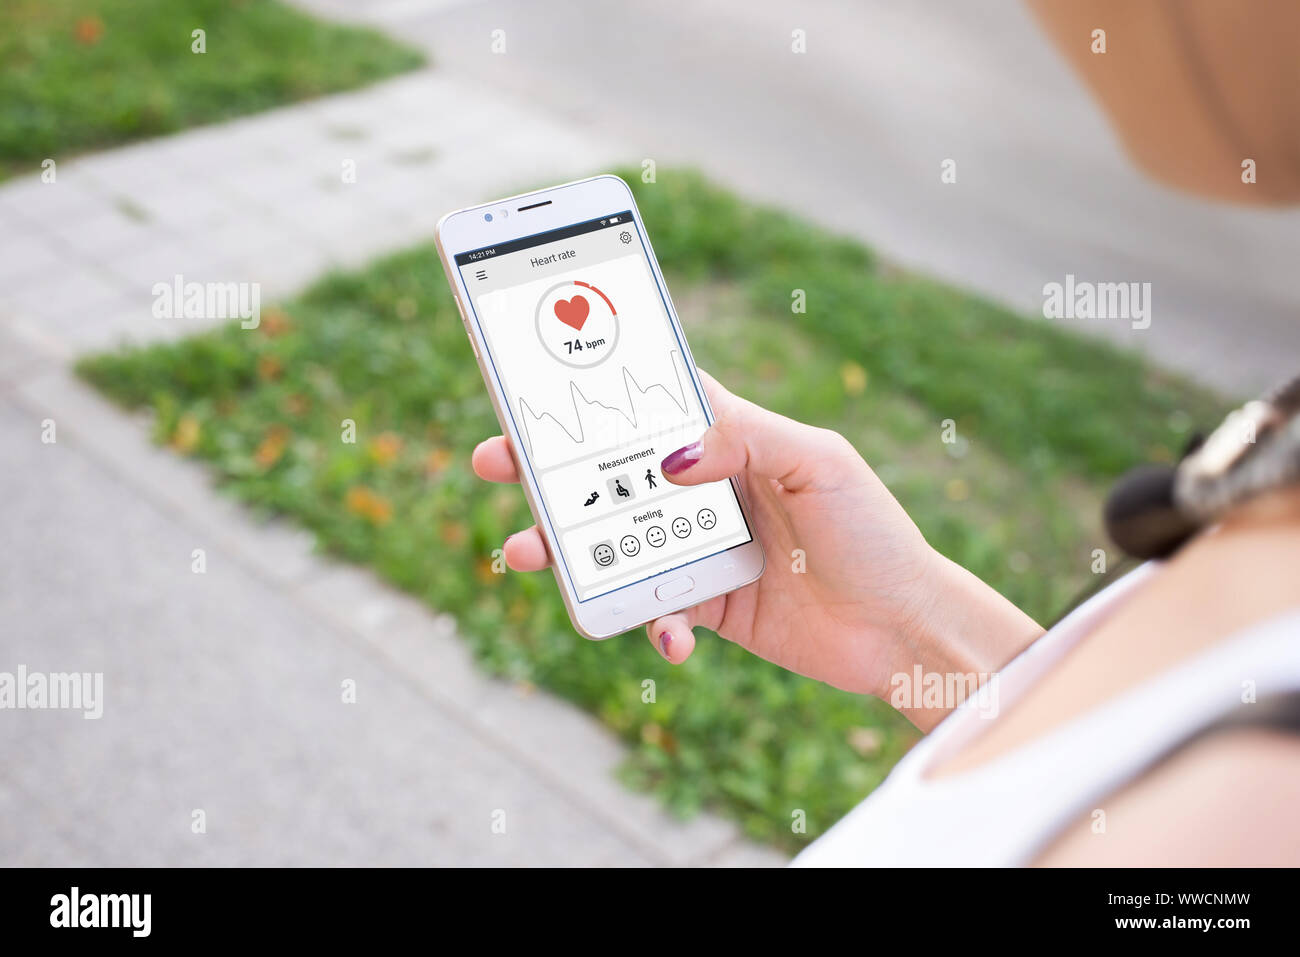 Girl use app and sensor on mobile phone to measure heart rate and SpO2. Stock Photo